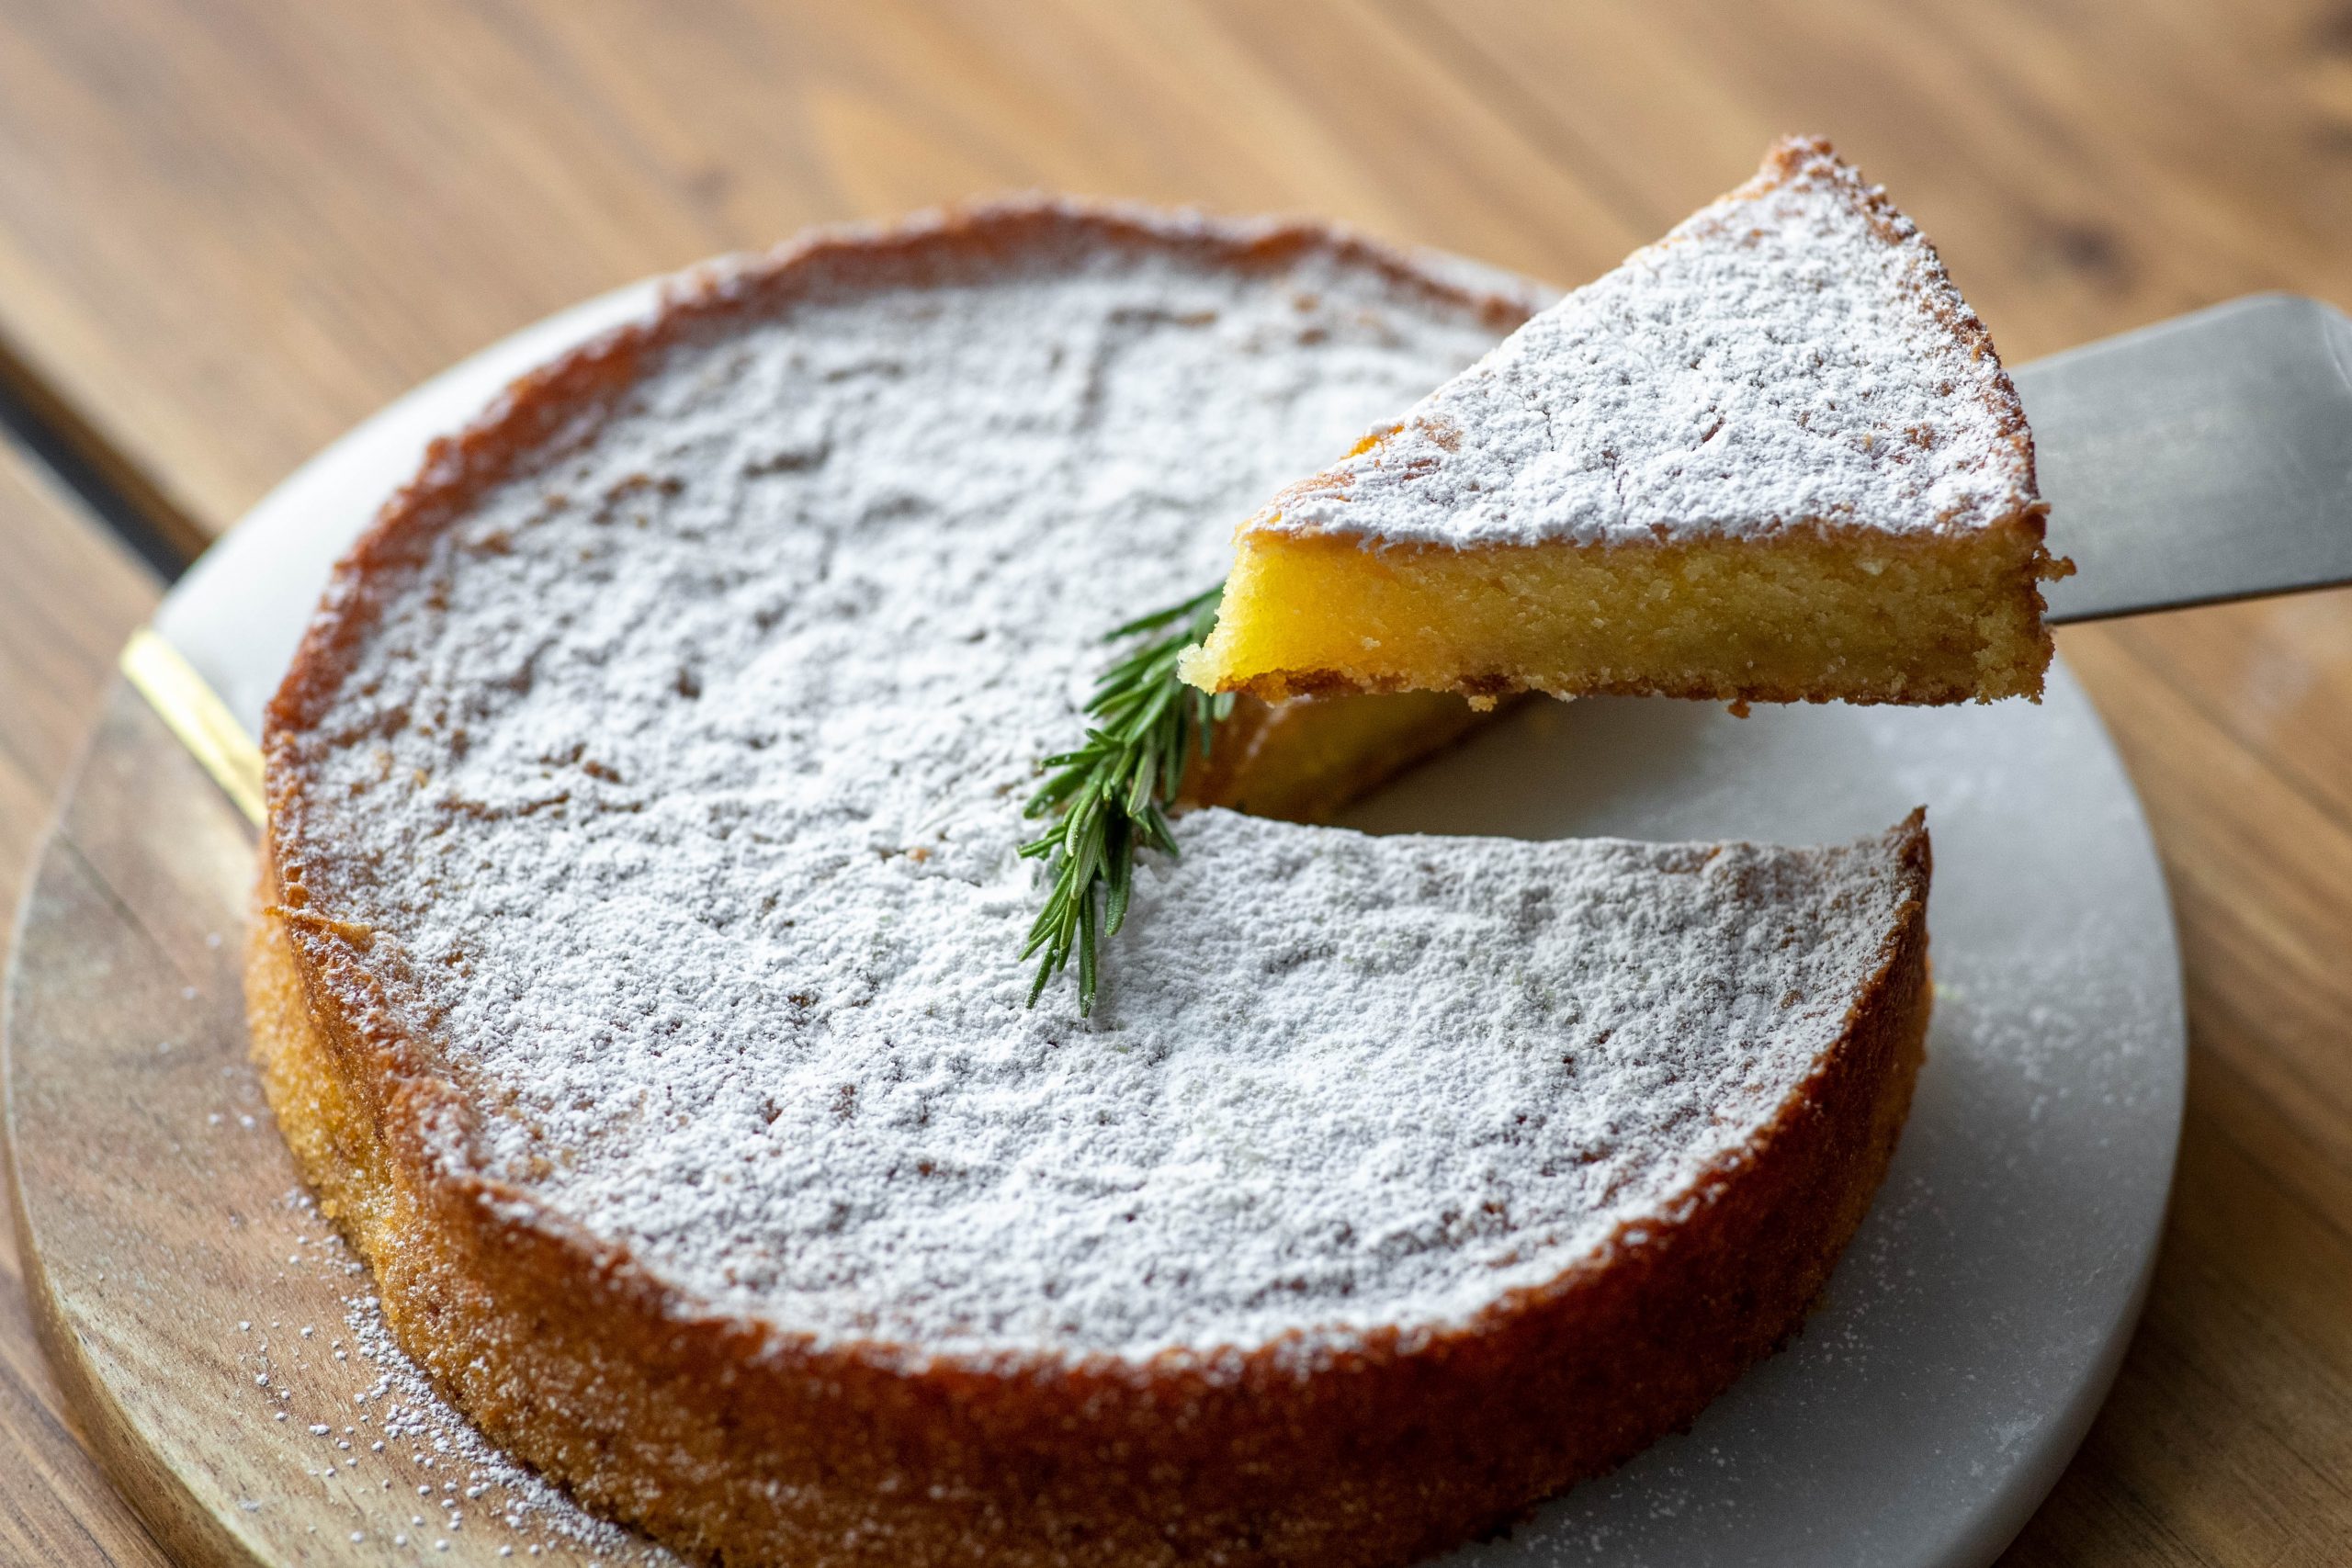 London Dairy Cafe Brings a Tuscan Olive Oil Cake To Dubai